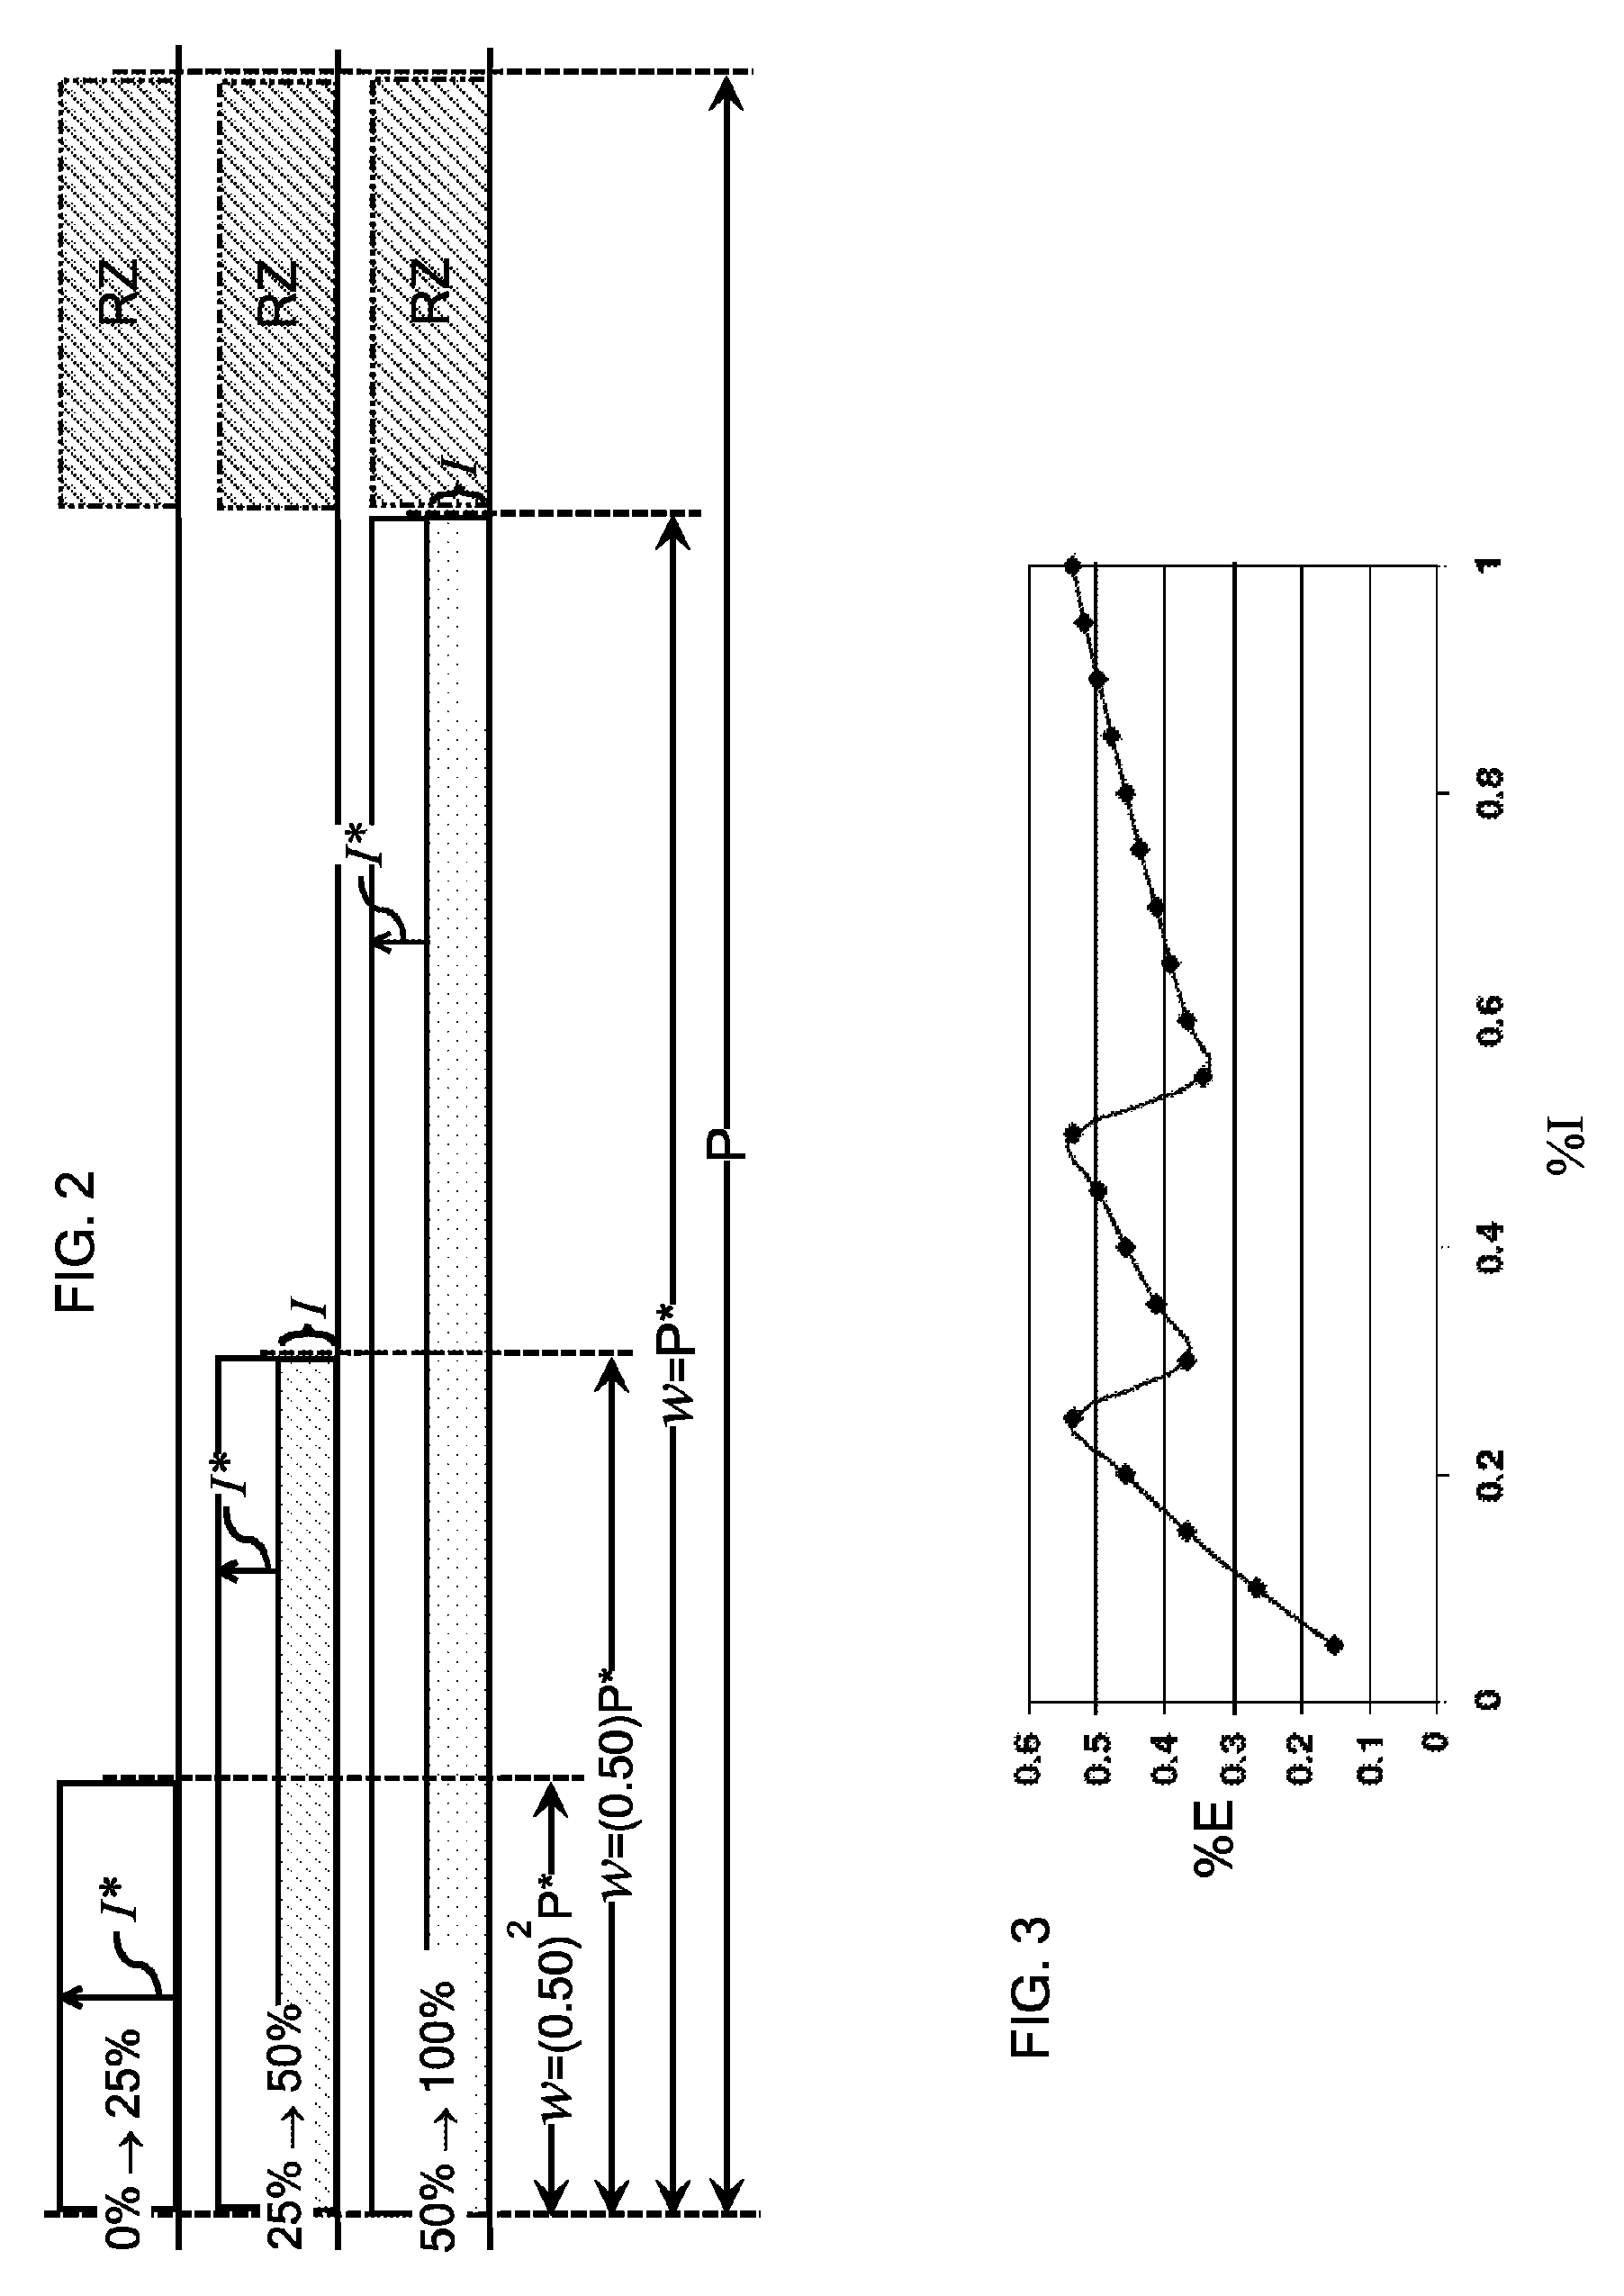 Pulse mode modulation in frequency converted laser sources